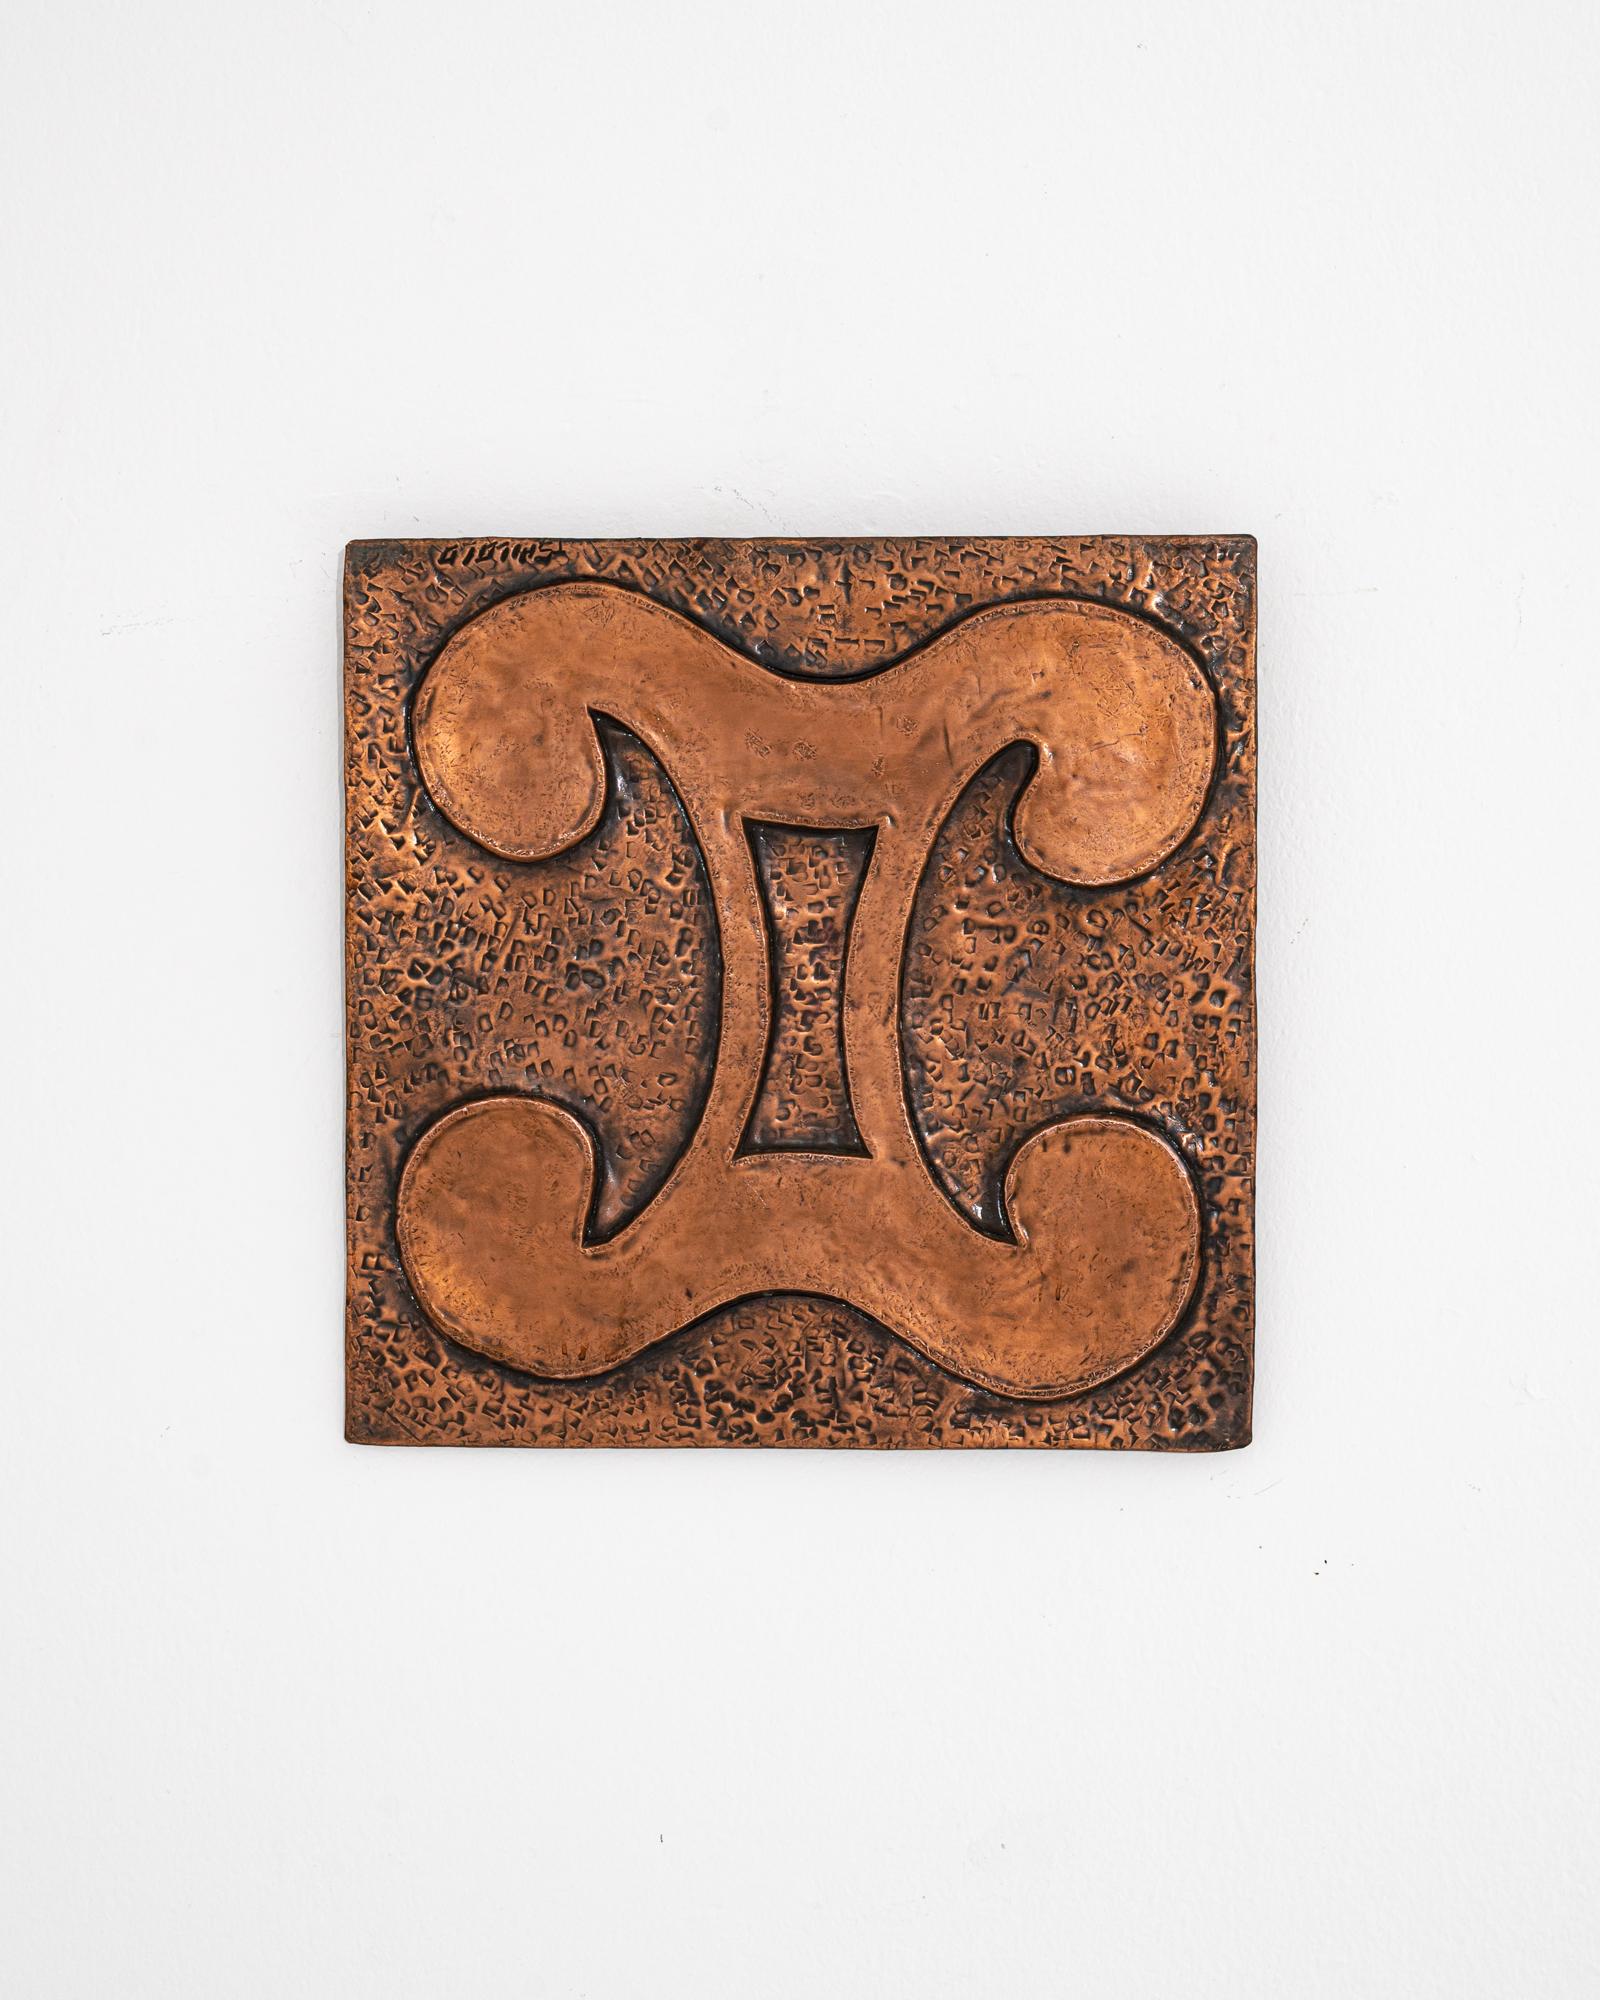 Bold and eye-catching, this copper wall decoration makes a unique vintage accent. The square plaque is decorated with a raised metal symbol —abstract and typographic, the form creates an intriguing motif. The background is composed of marks made by